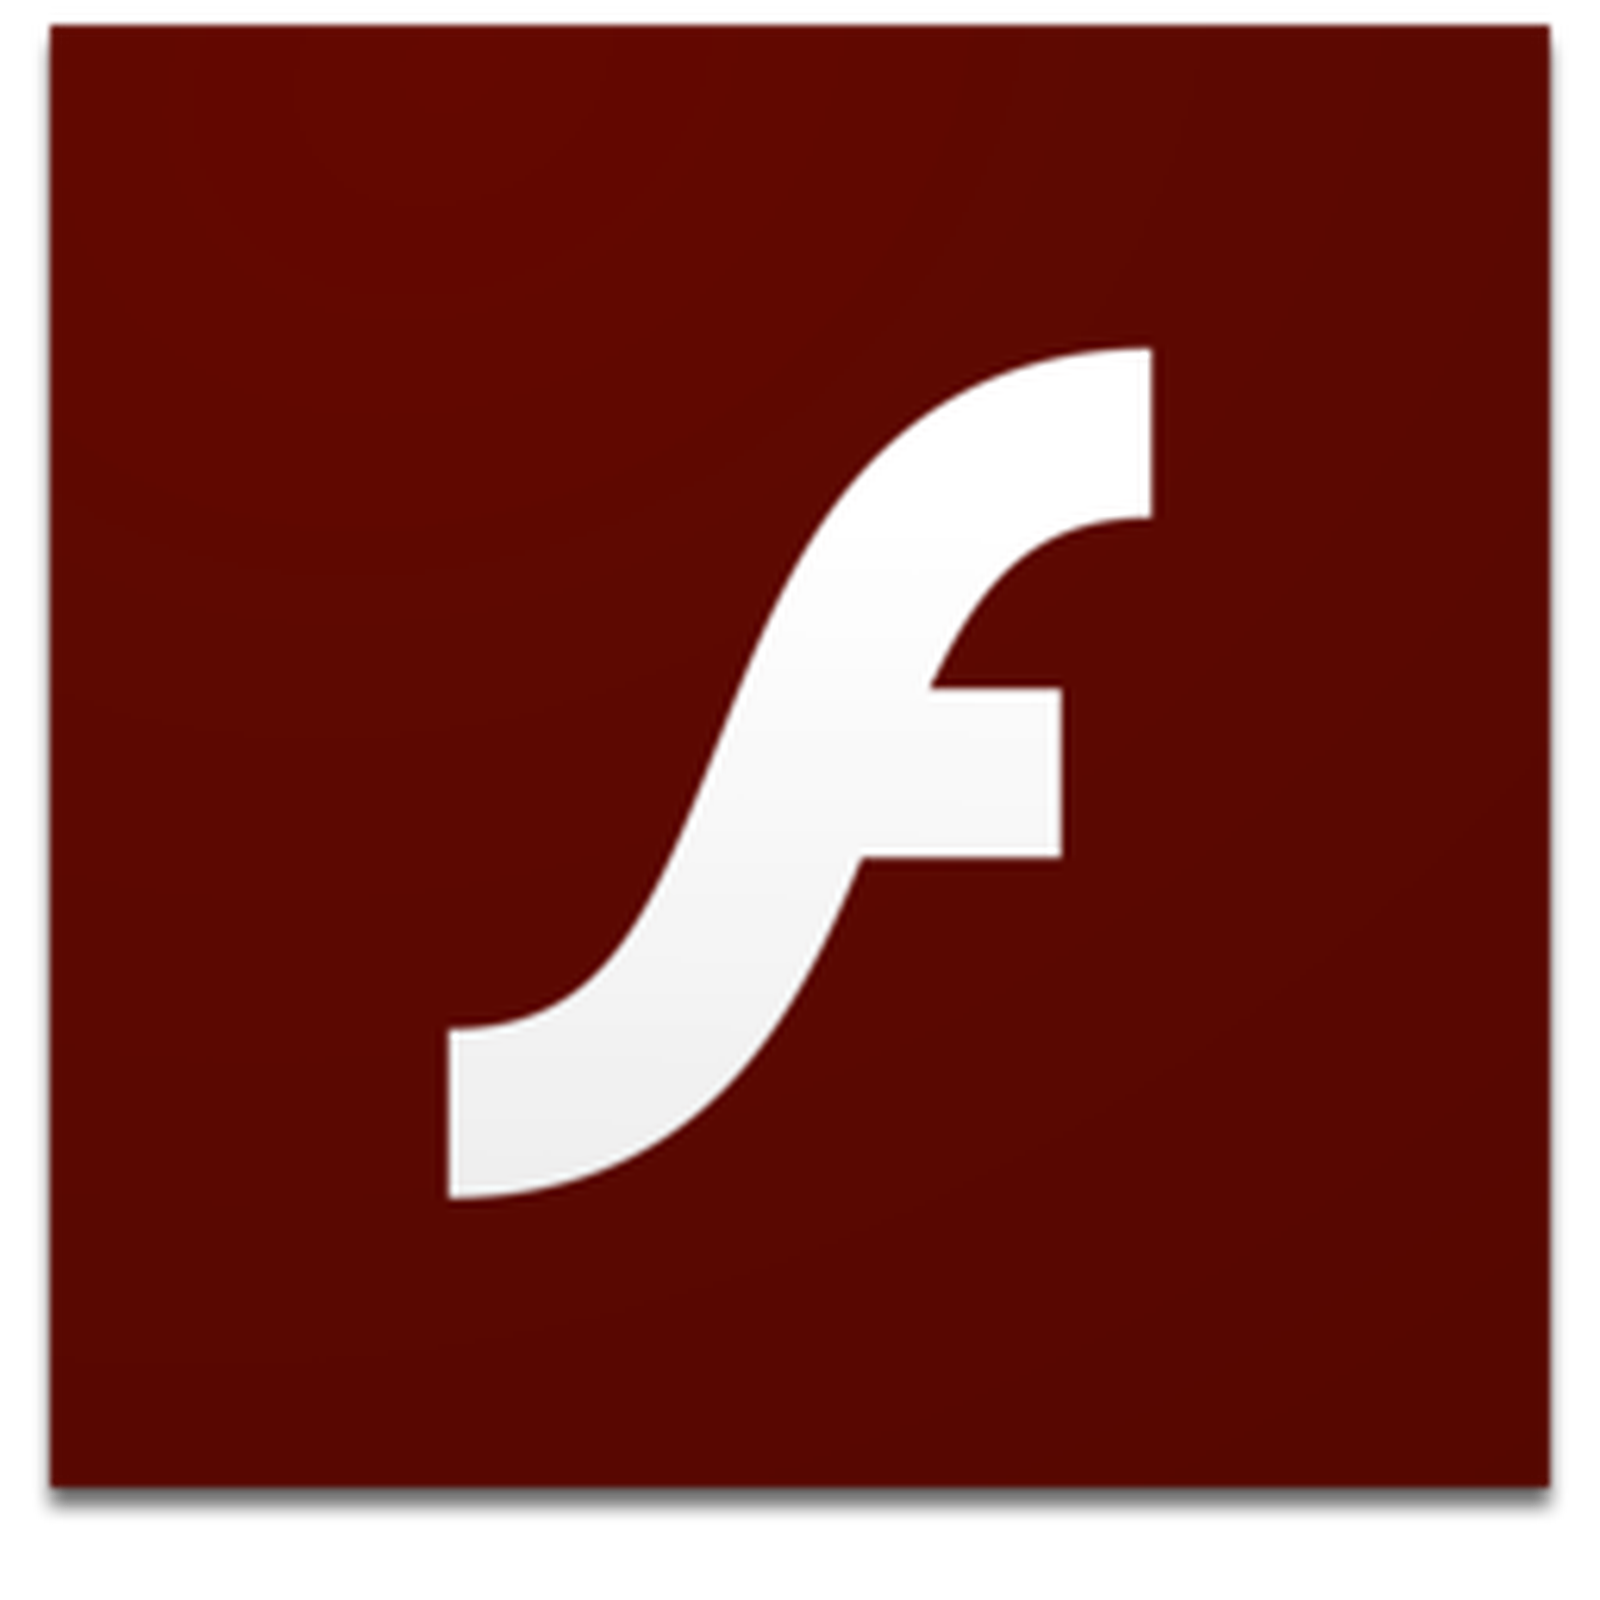 what better than adobe flash player for firefox